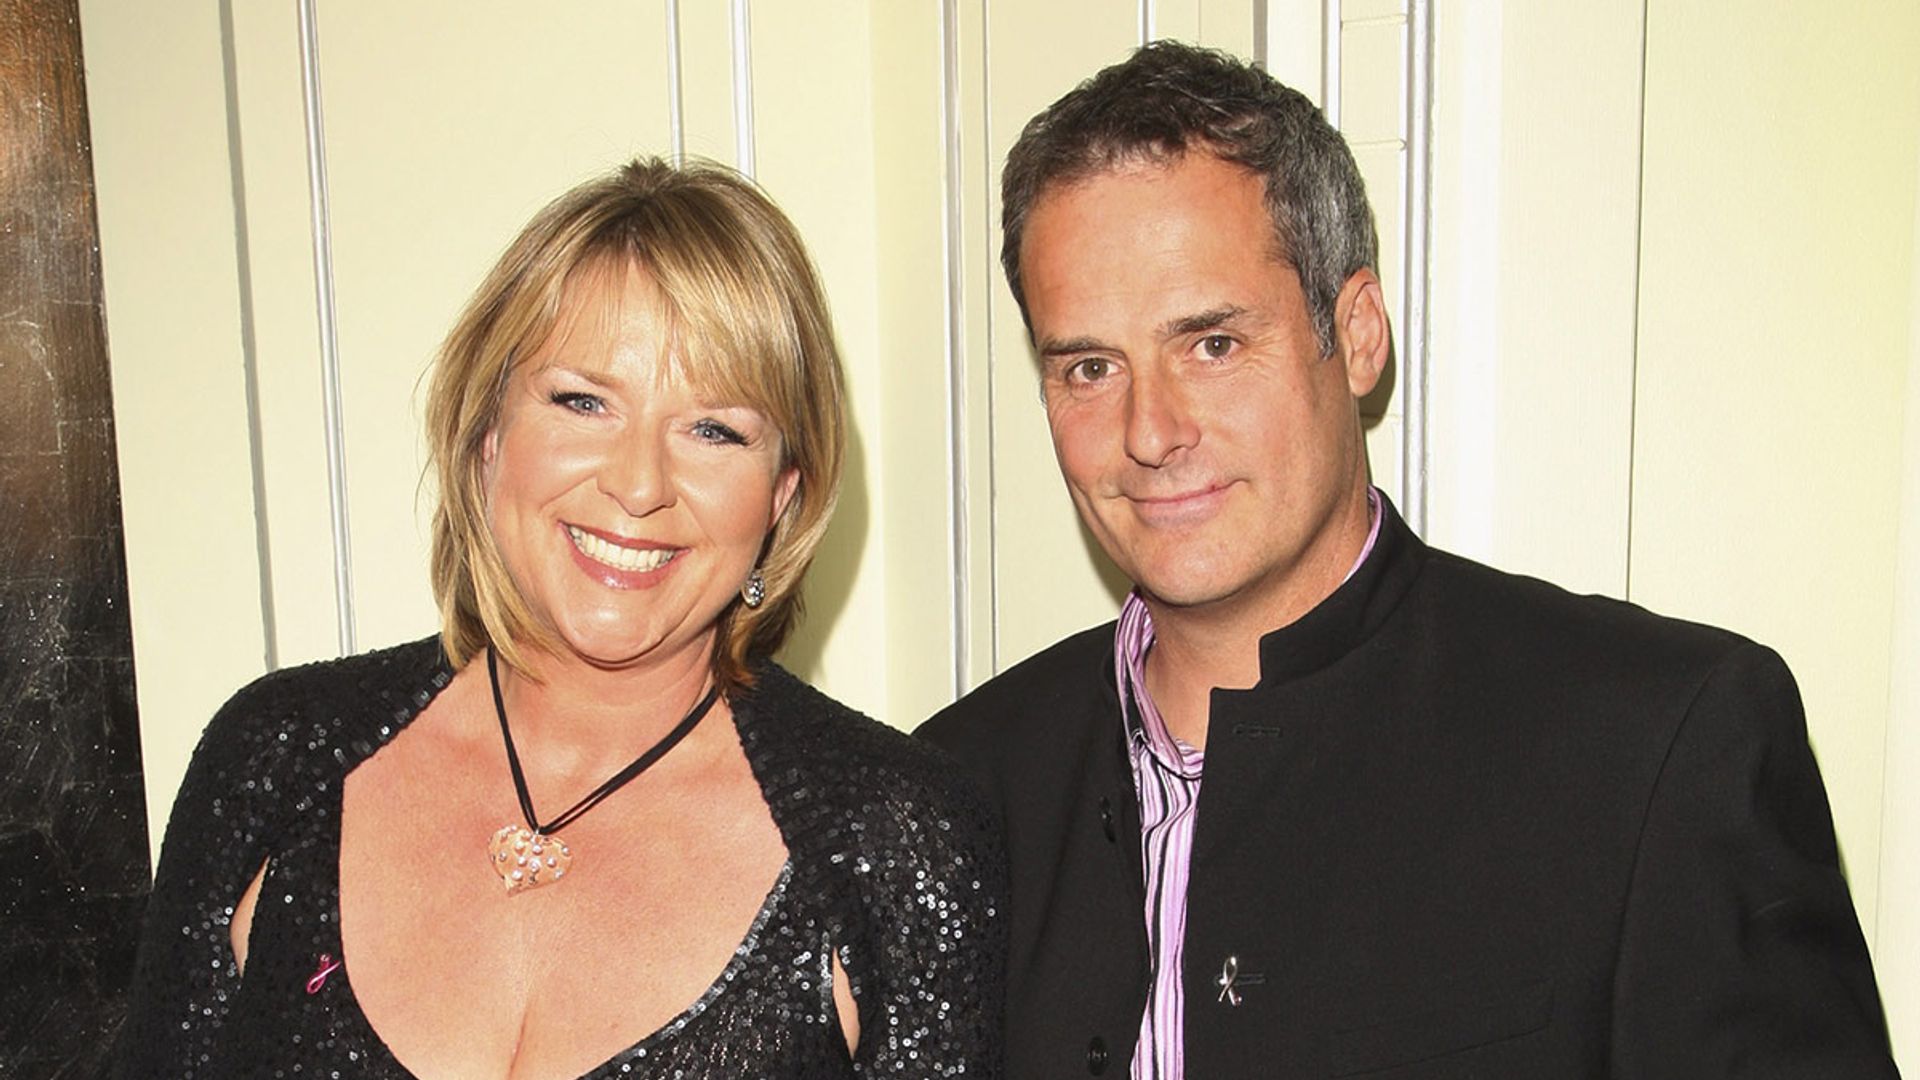 Fern Britton reveals she feels liberated following separation from husband Phil Vickery